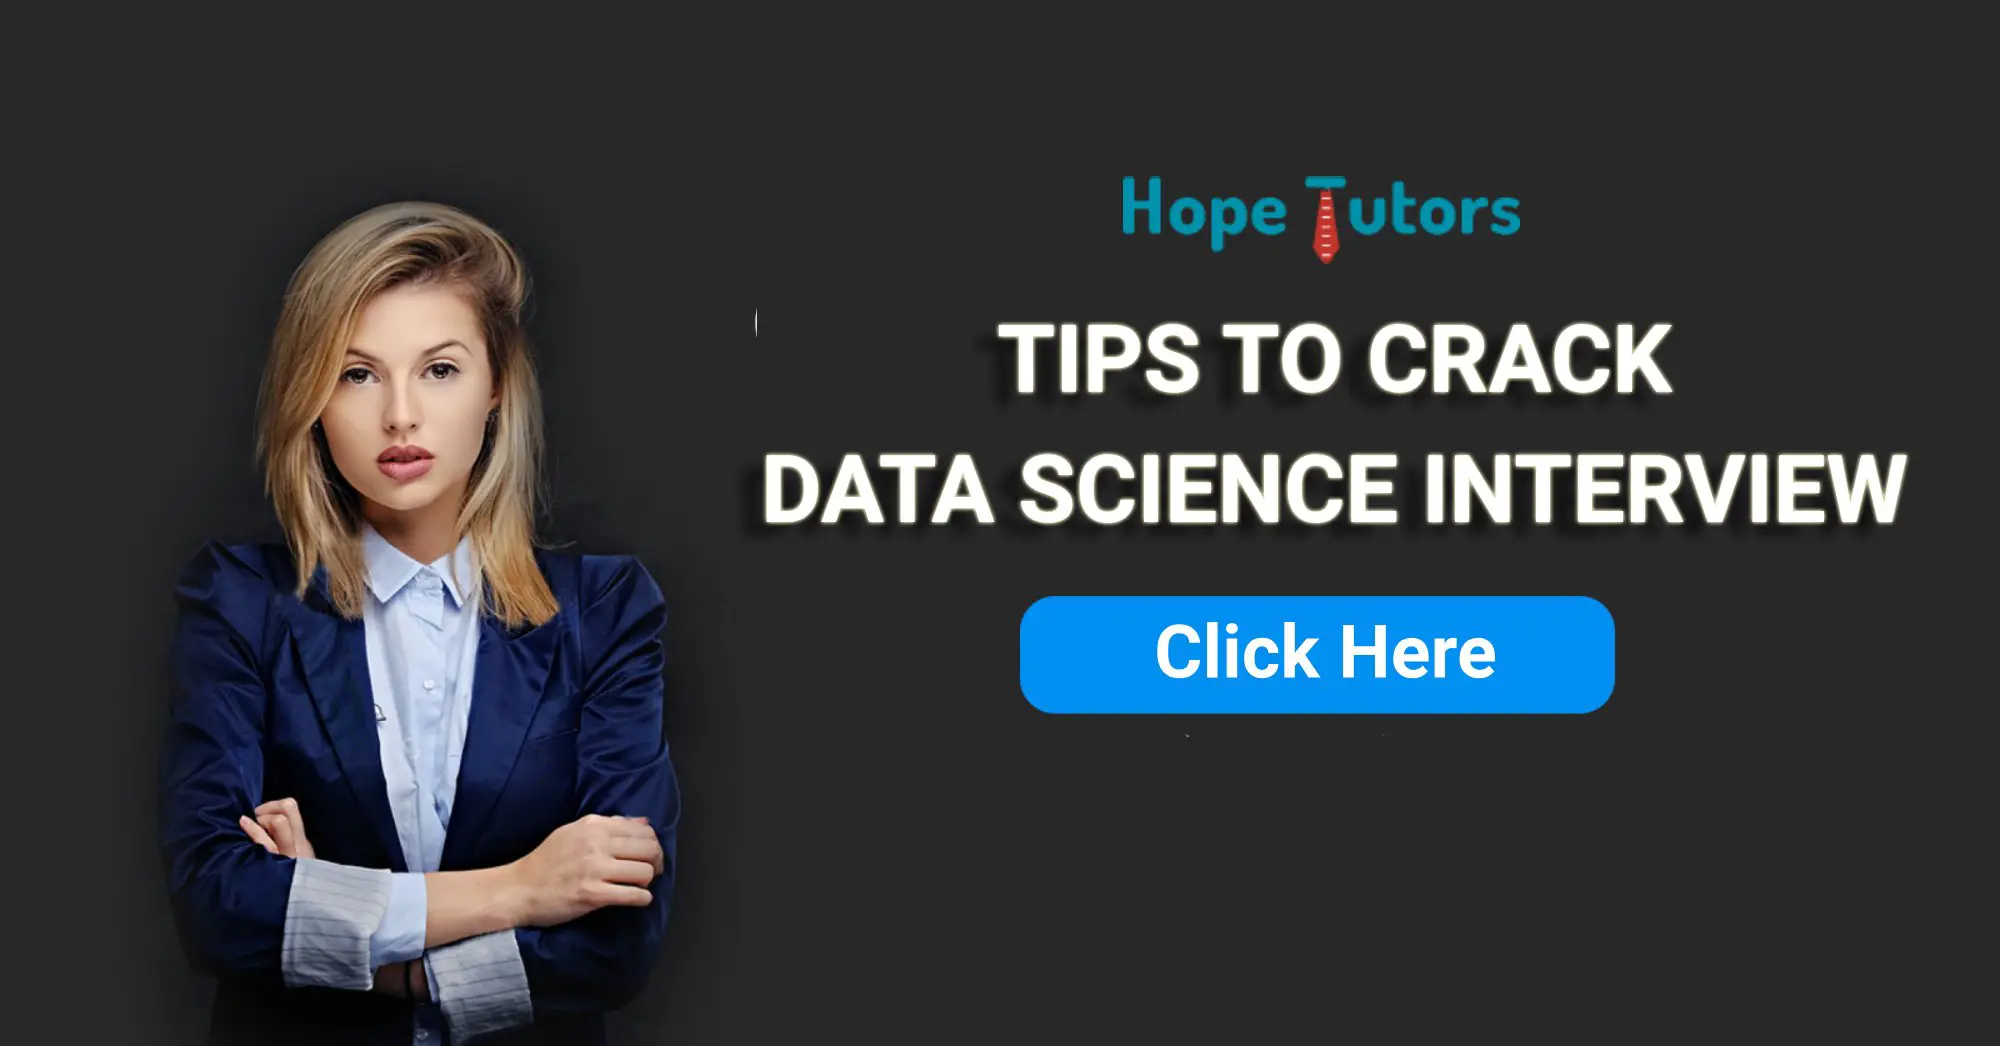 How to Crack Data Science Interview